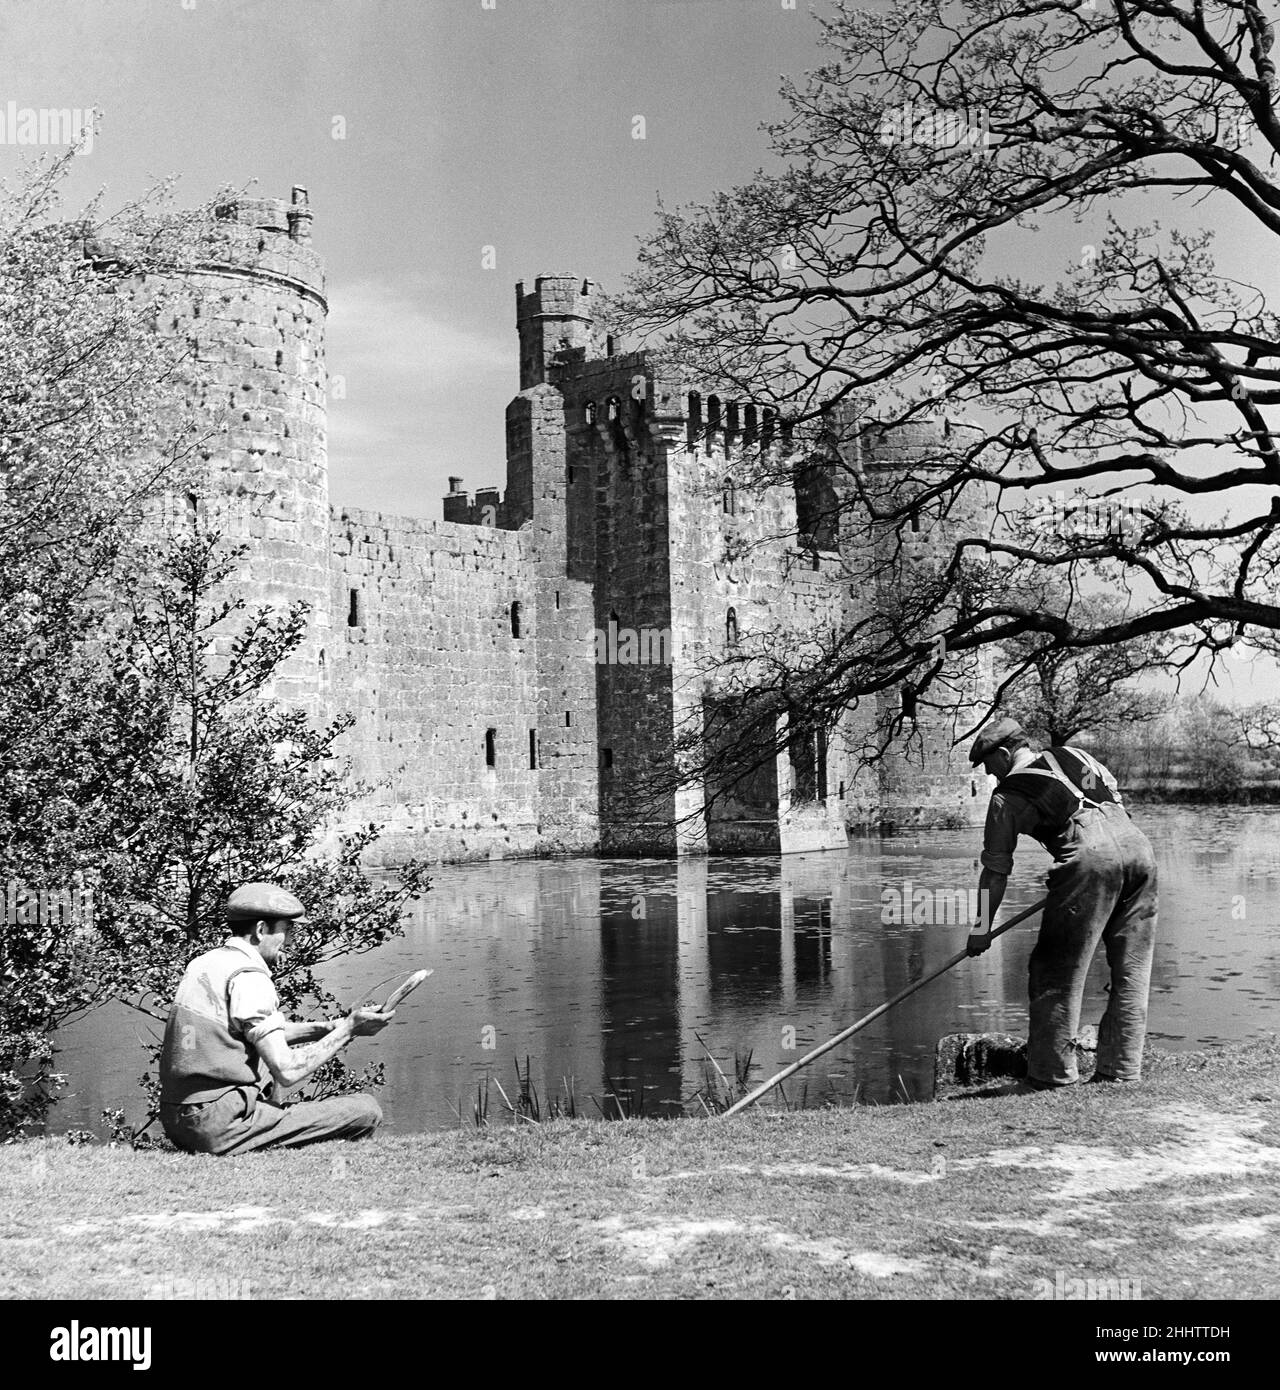 A groundkeeper cleaning the moat outside Bodiam Castle, a 14th-century moated castle near Robertsbridge in East Sussex. 5th May 1952. Stock Photo